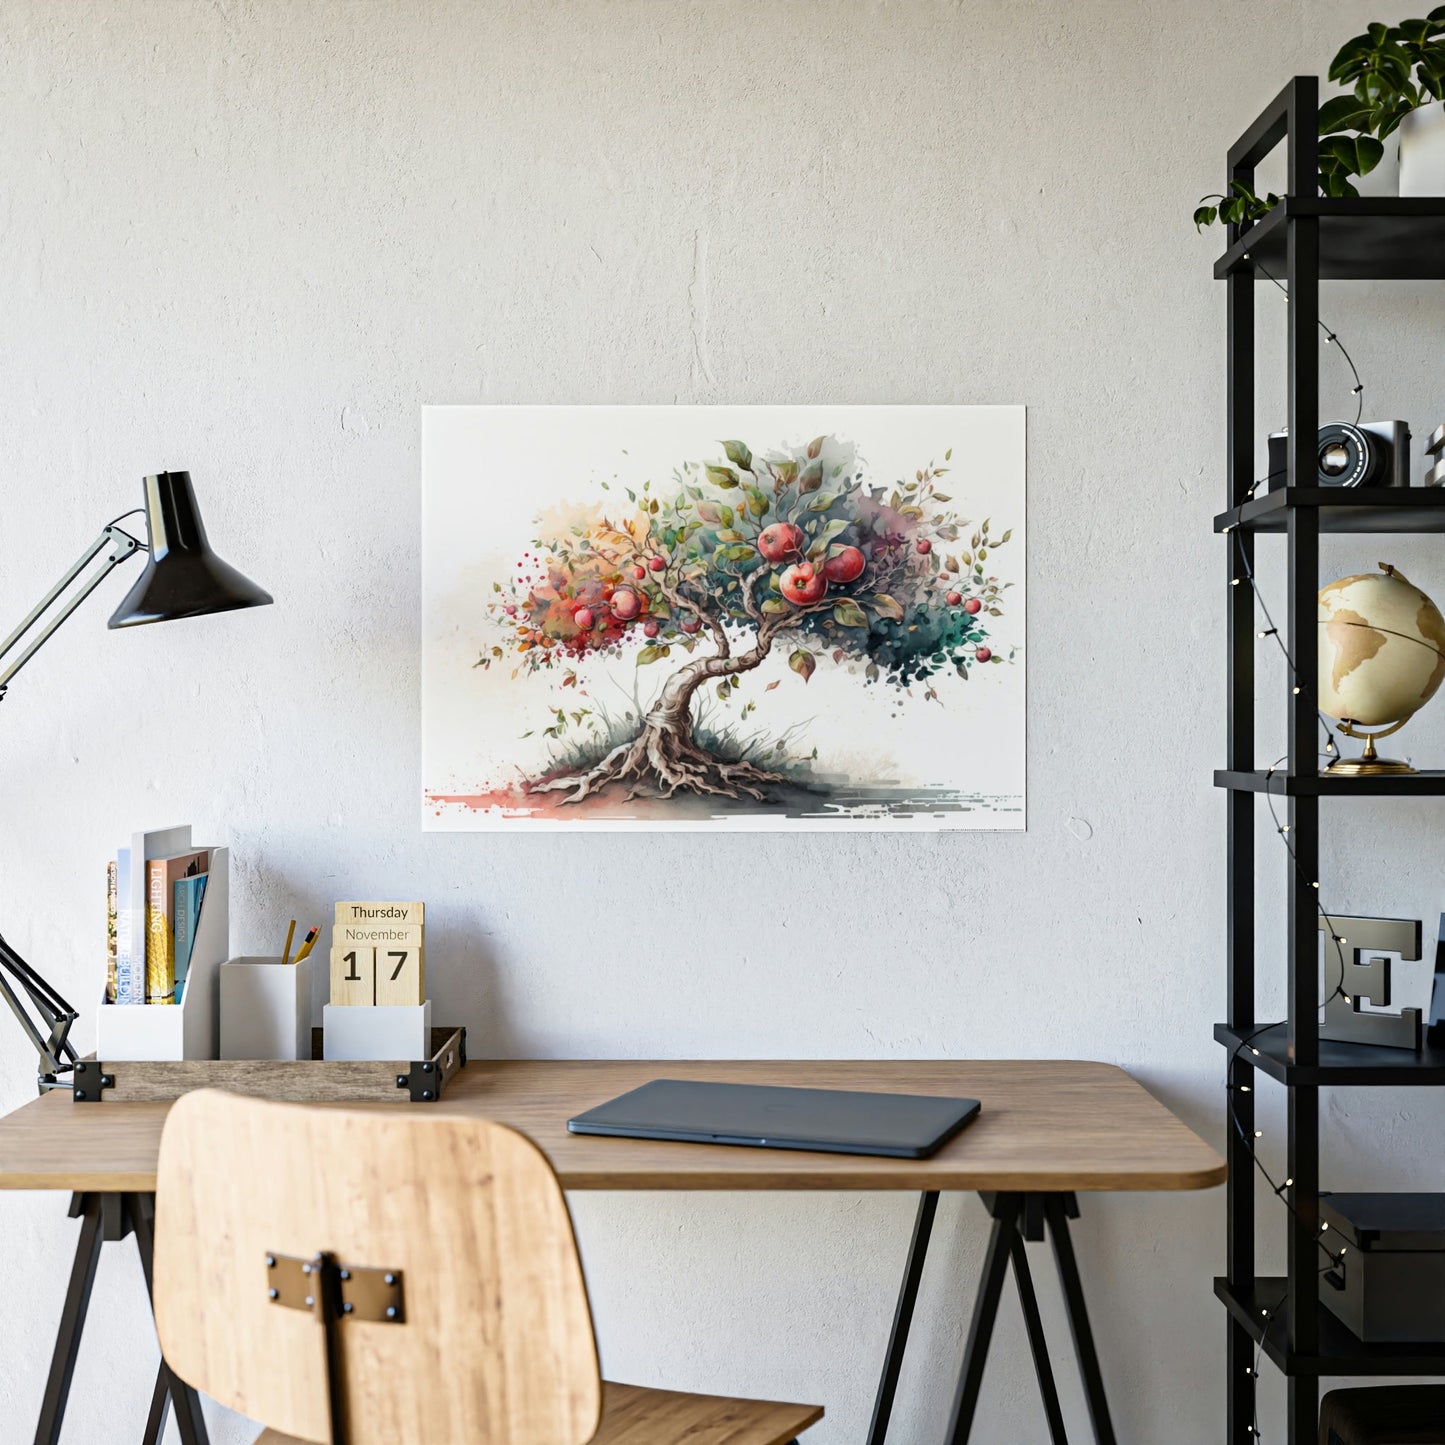 Tapestry of Apple Trees: Natural Canvas & Poster Print of Orchards